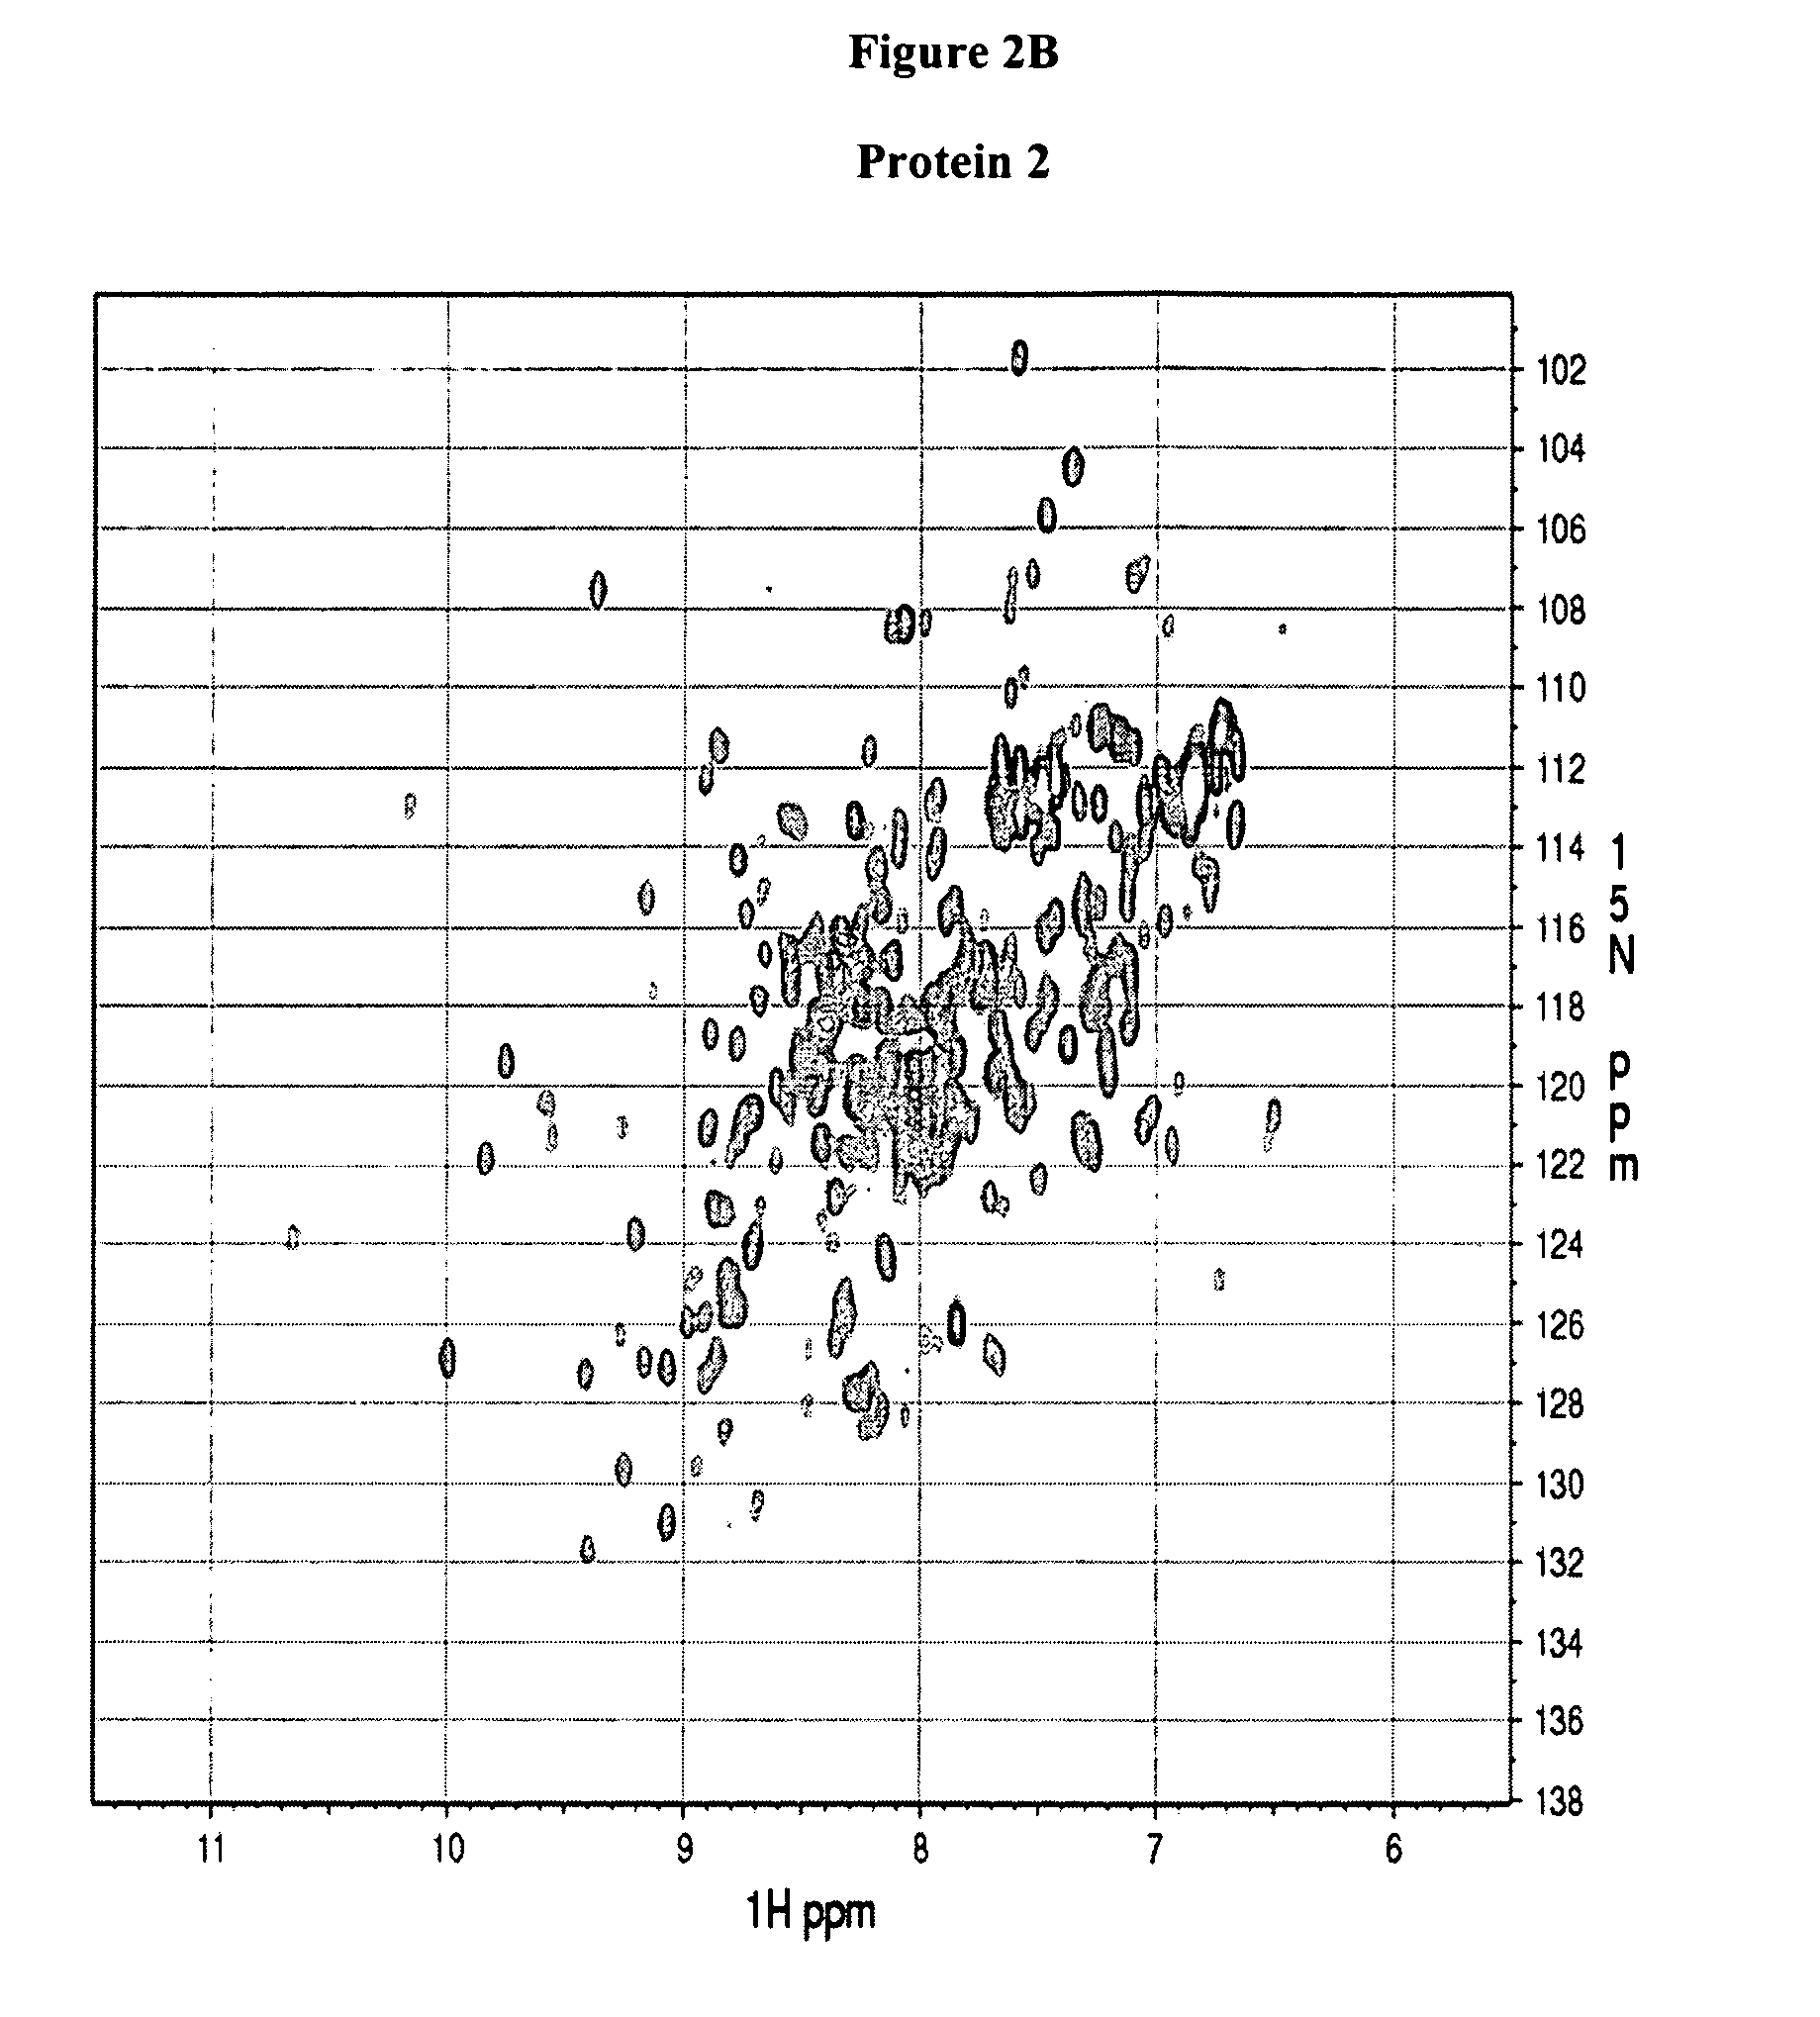 Evaluation of spectra